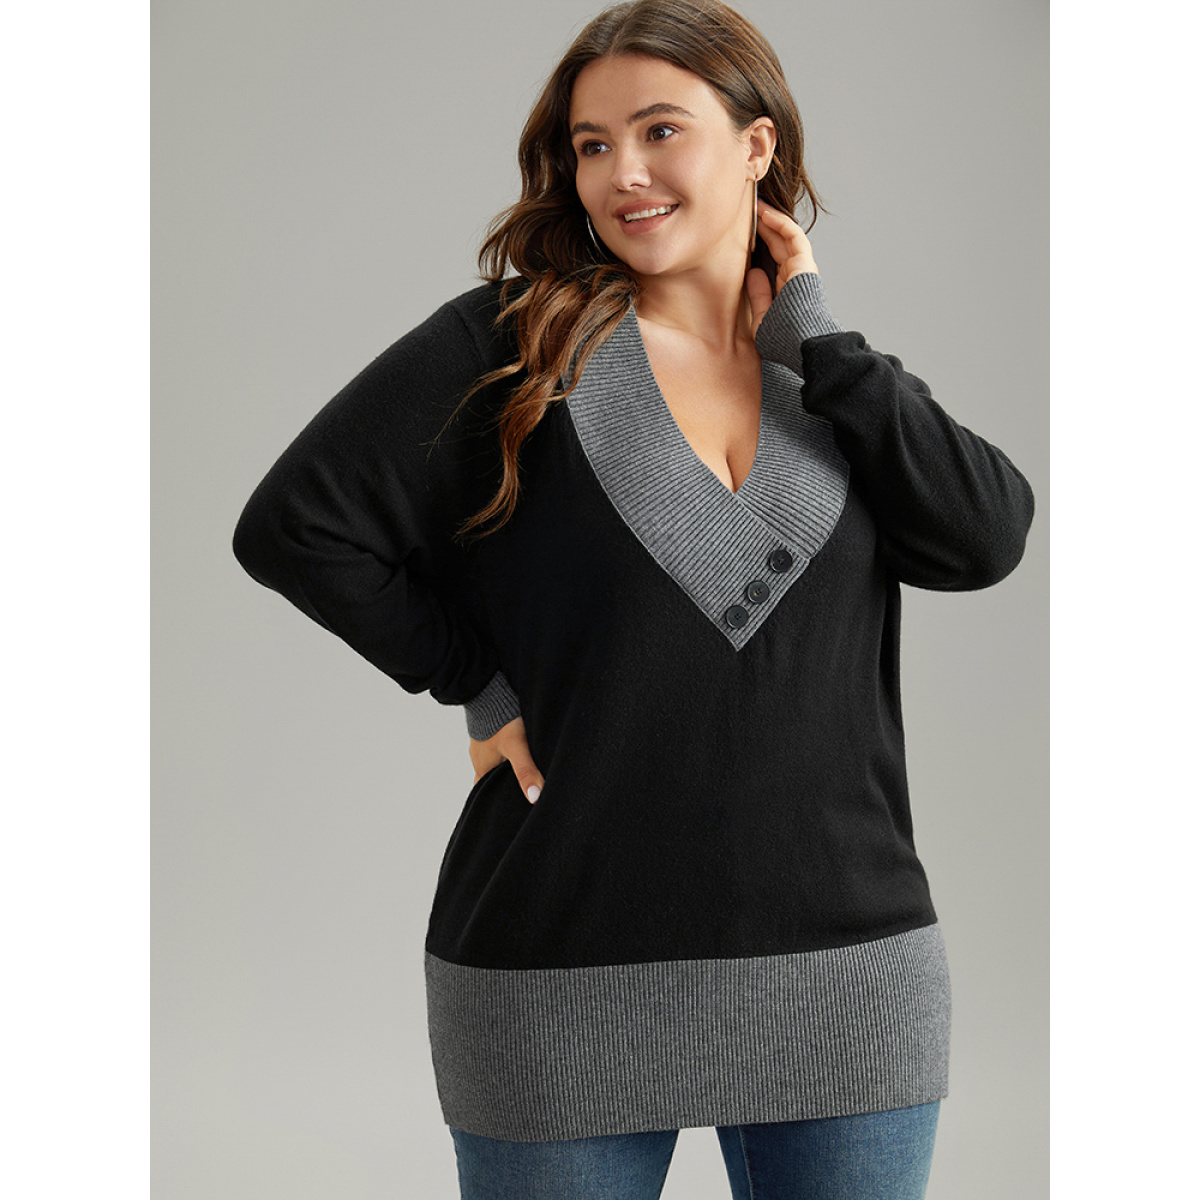 

Plus Size Supersoft Essentials Contrast Deep V Neck Button Detail Pullover Black Women Casual Long Sleeve Deep V-neck Everyday Pullovers BloomChic